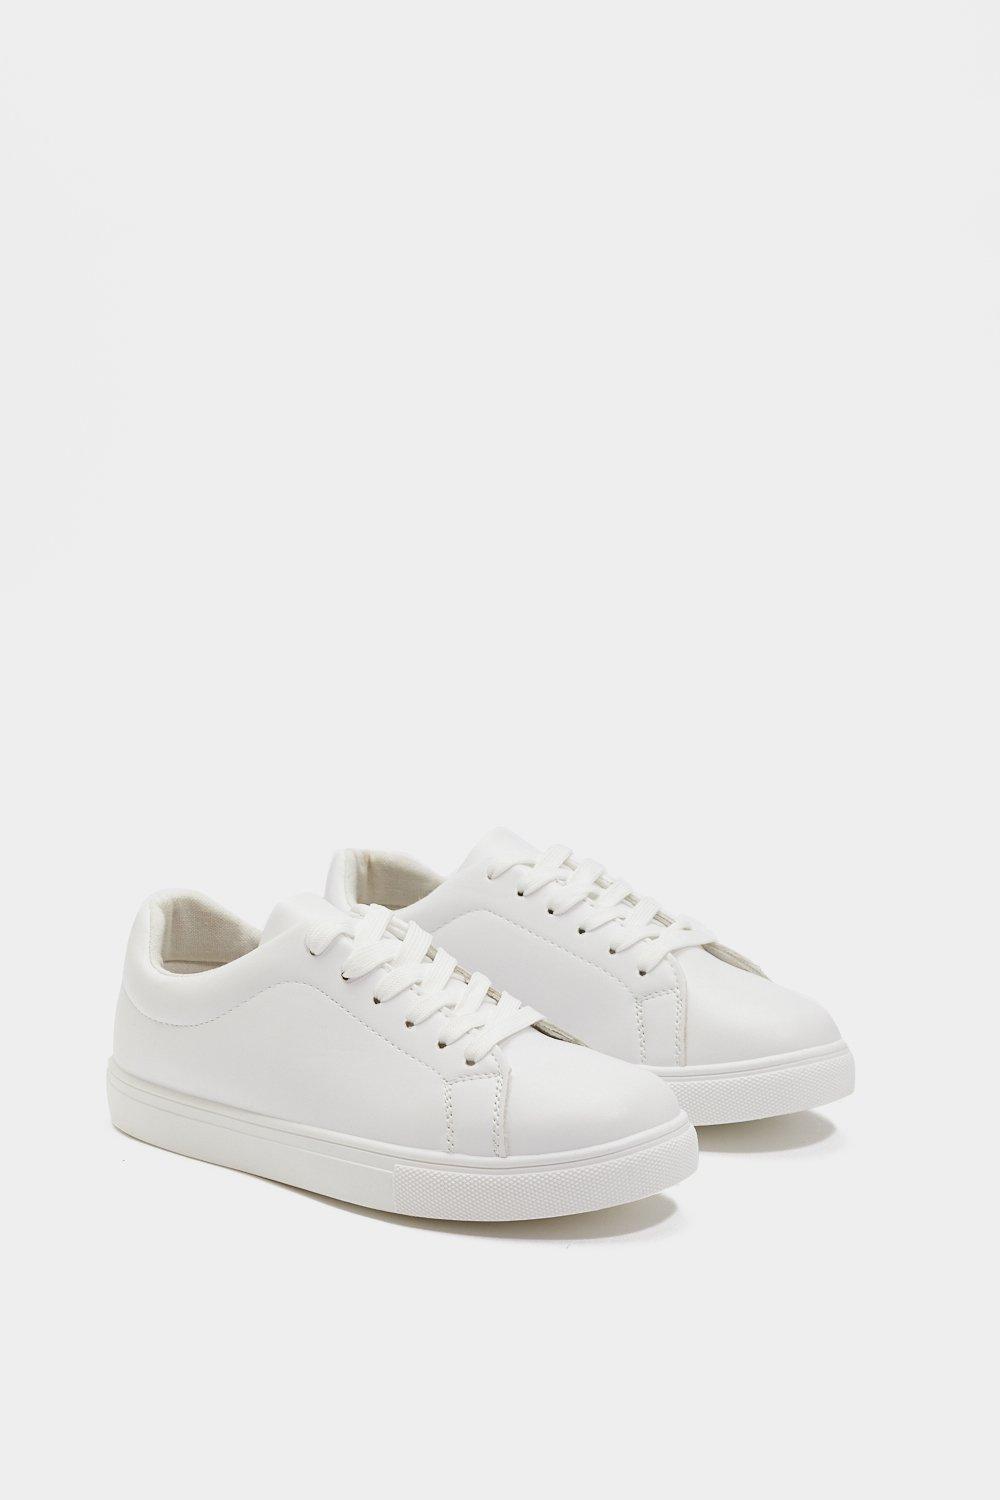 Basic Happen Faux Leather Lace-Up Sneakers